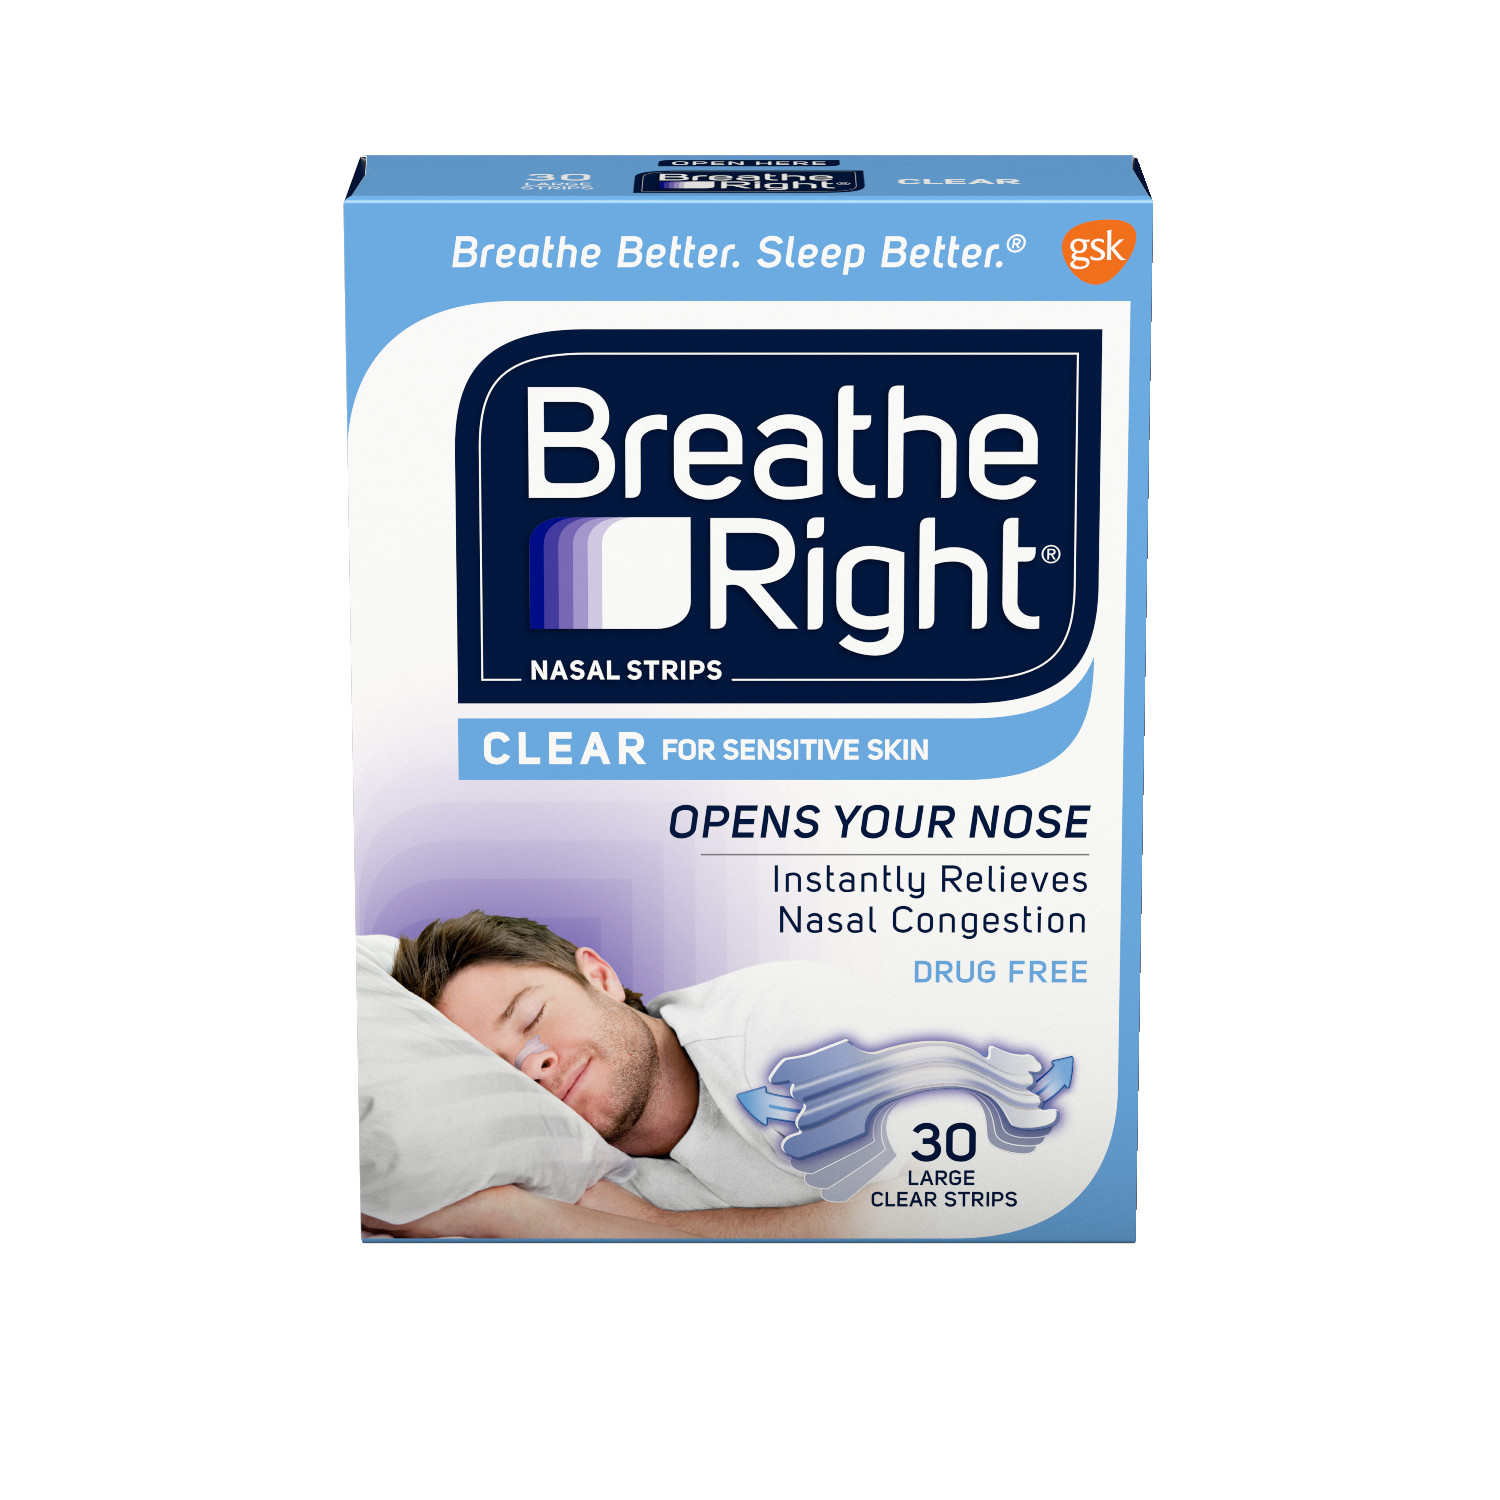 Breathe Right Original Clear Nasal Strips, Nasal Congestion Relief due to Colds & Allergies, Large, Clear for Sensitive Skin, Drug-Free, 30 count - image 1 of 11